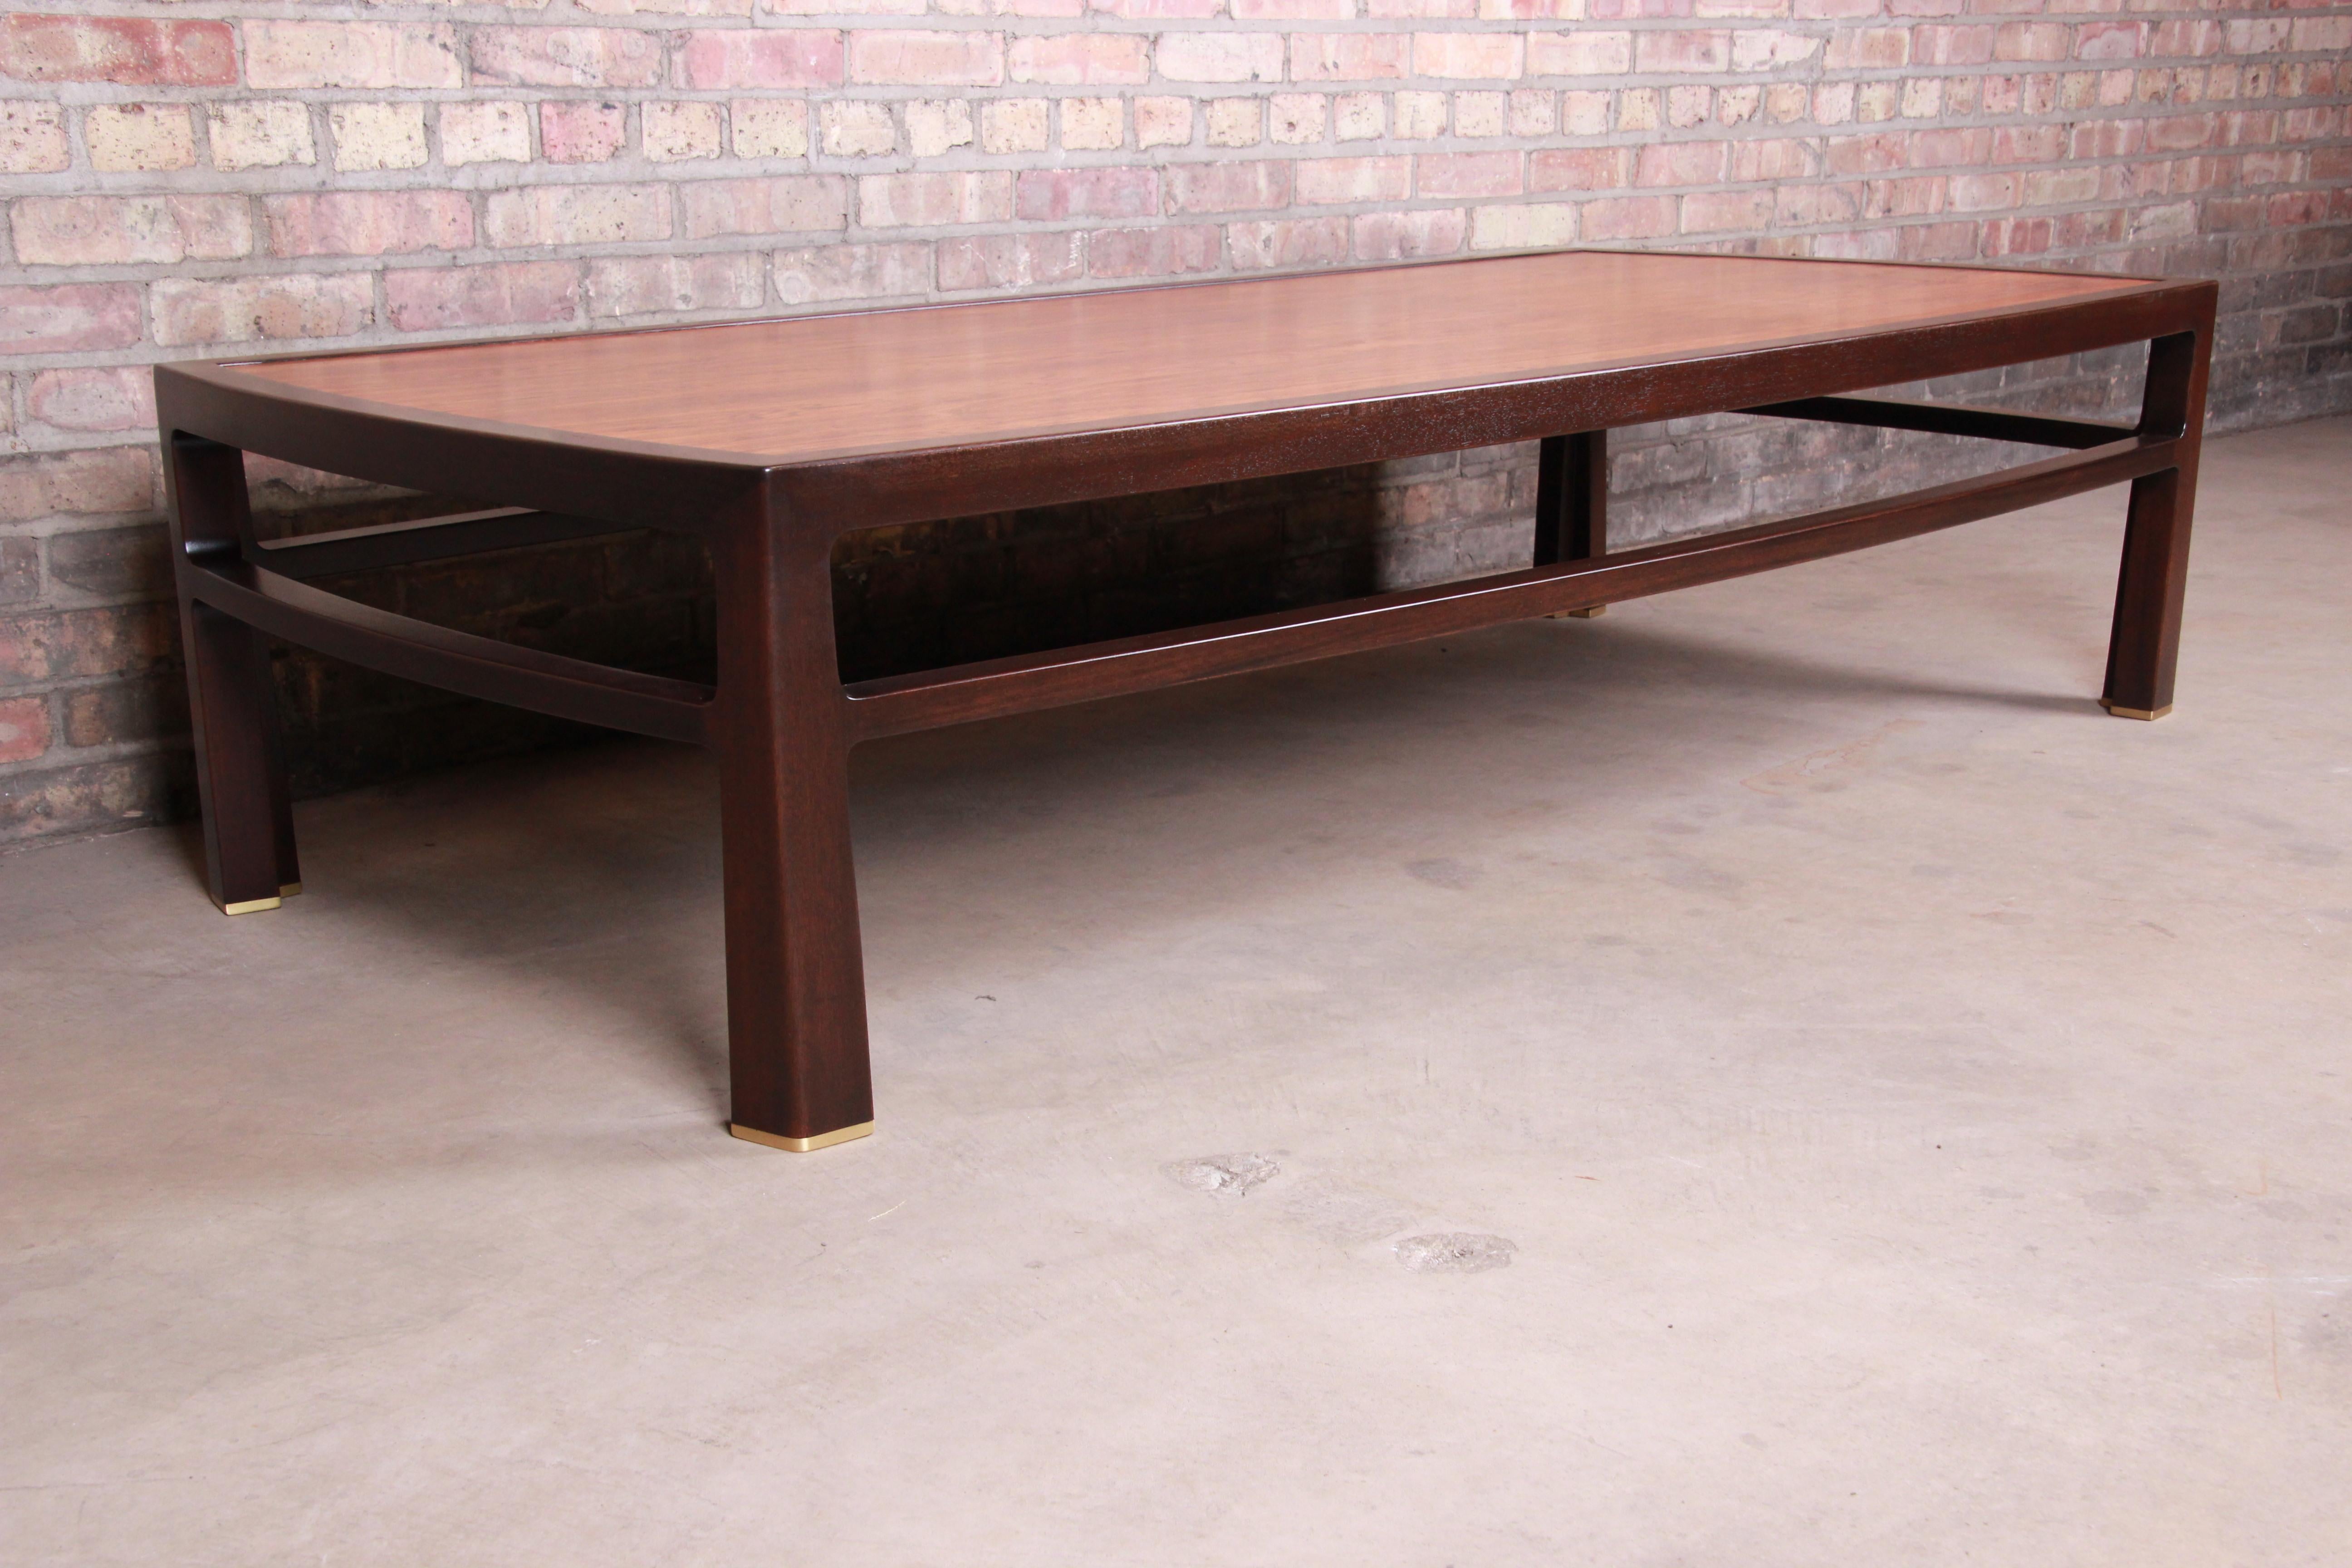 Mid-20th Century Edward Wormley for Dunbar Monumental Rosewood and Walnut Coffee Table, Restored For Sale